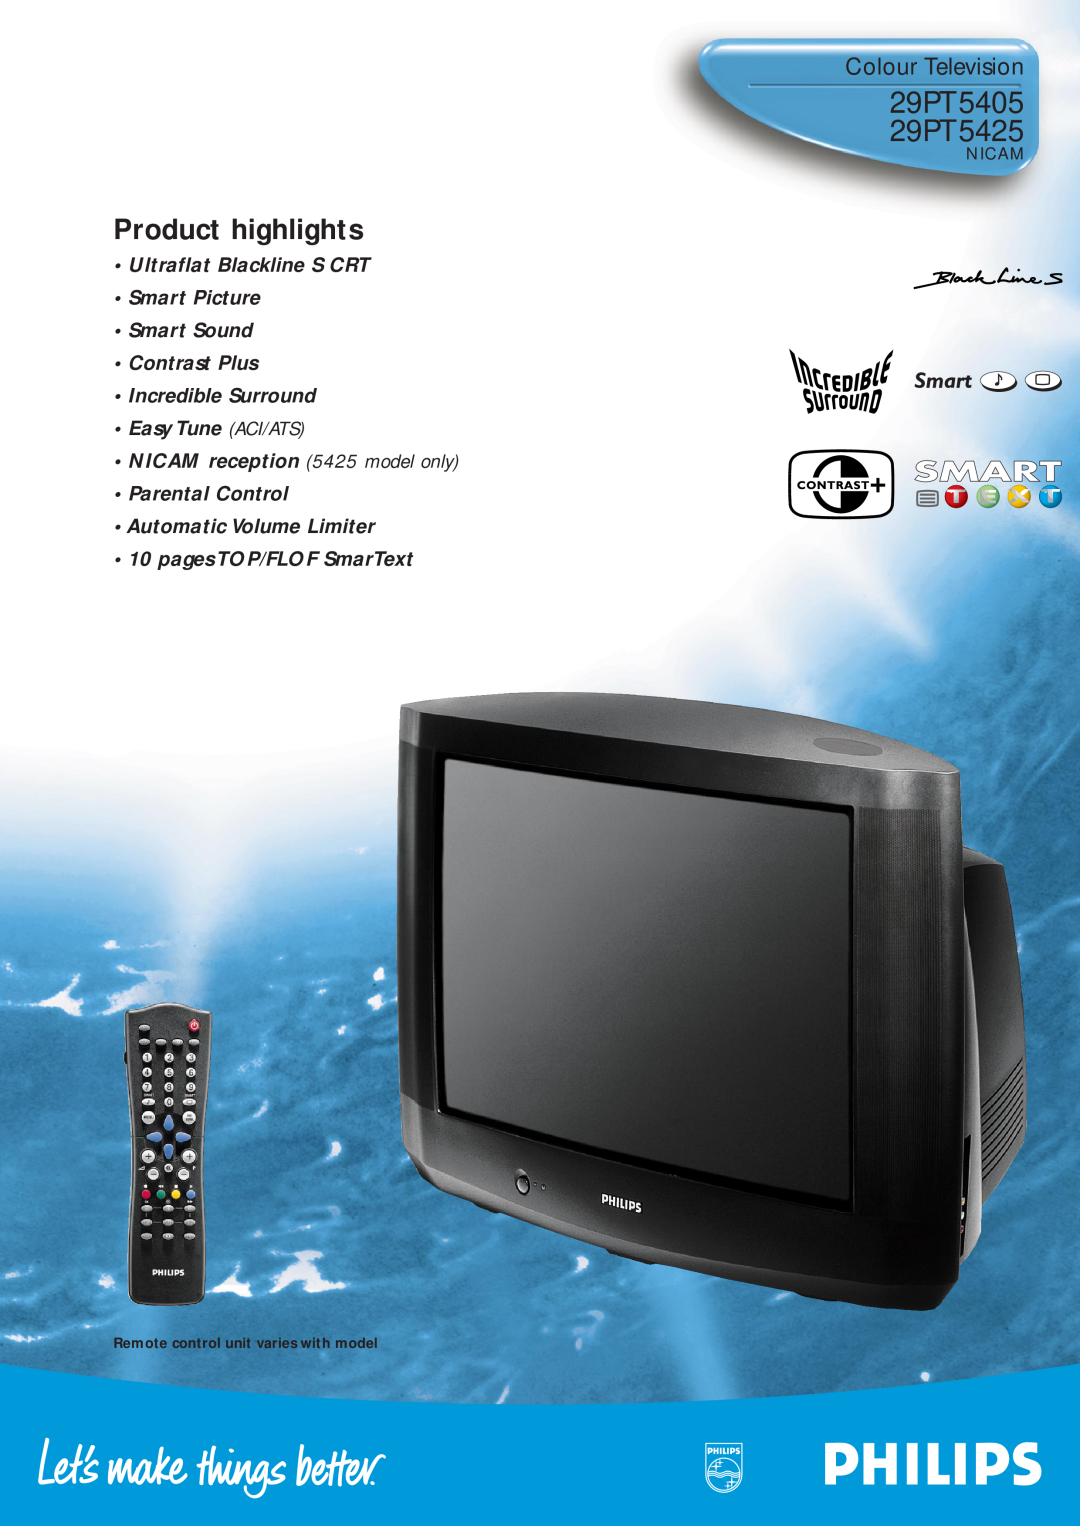 Philips manual 29PT5405 29PT5425, Product highlights, Colour Television, Nicam, Remote control unit varies with model 